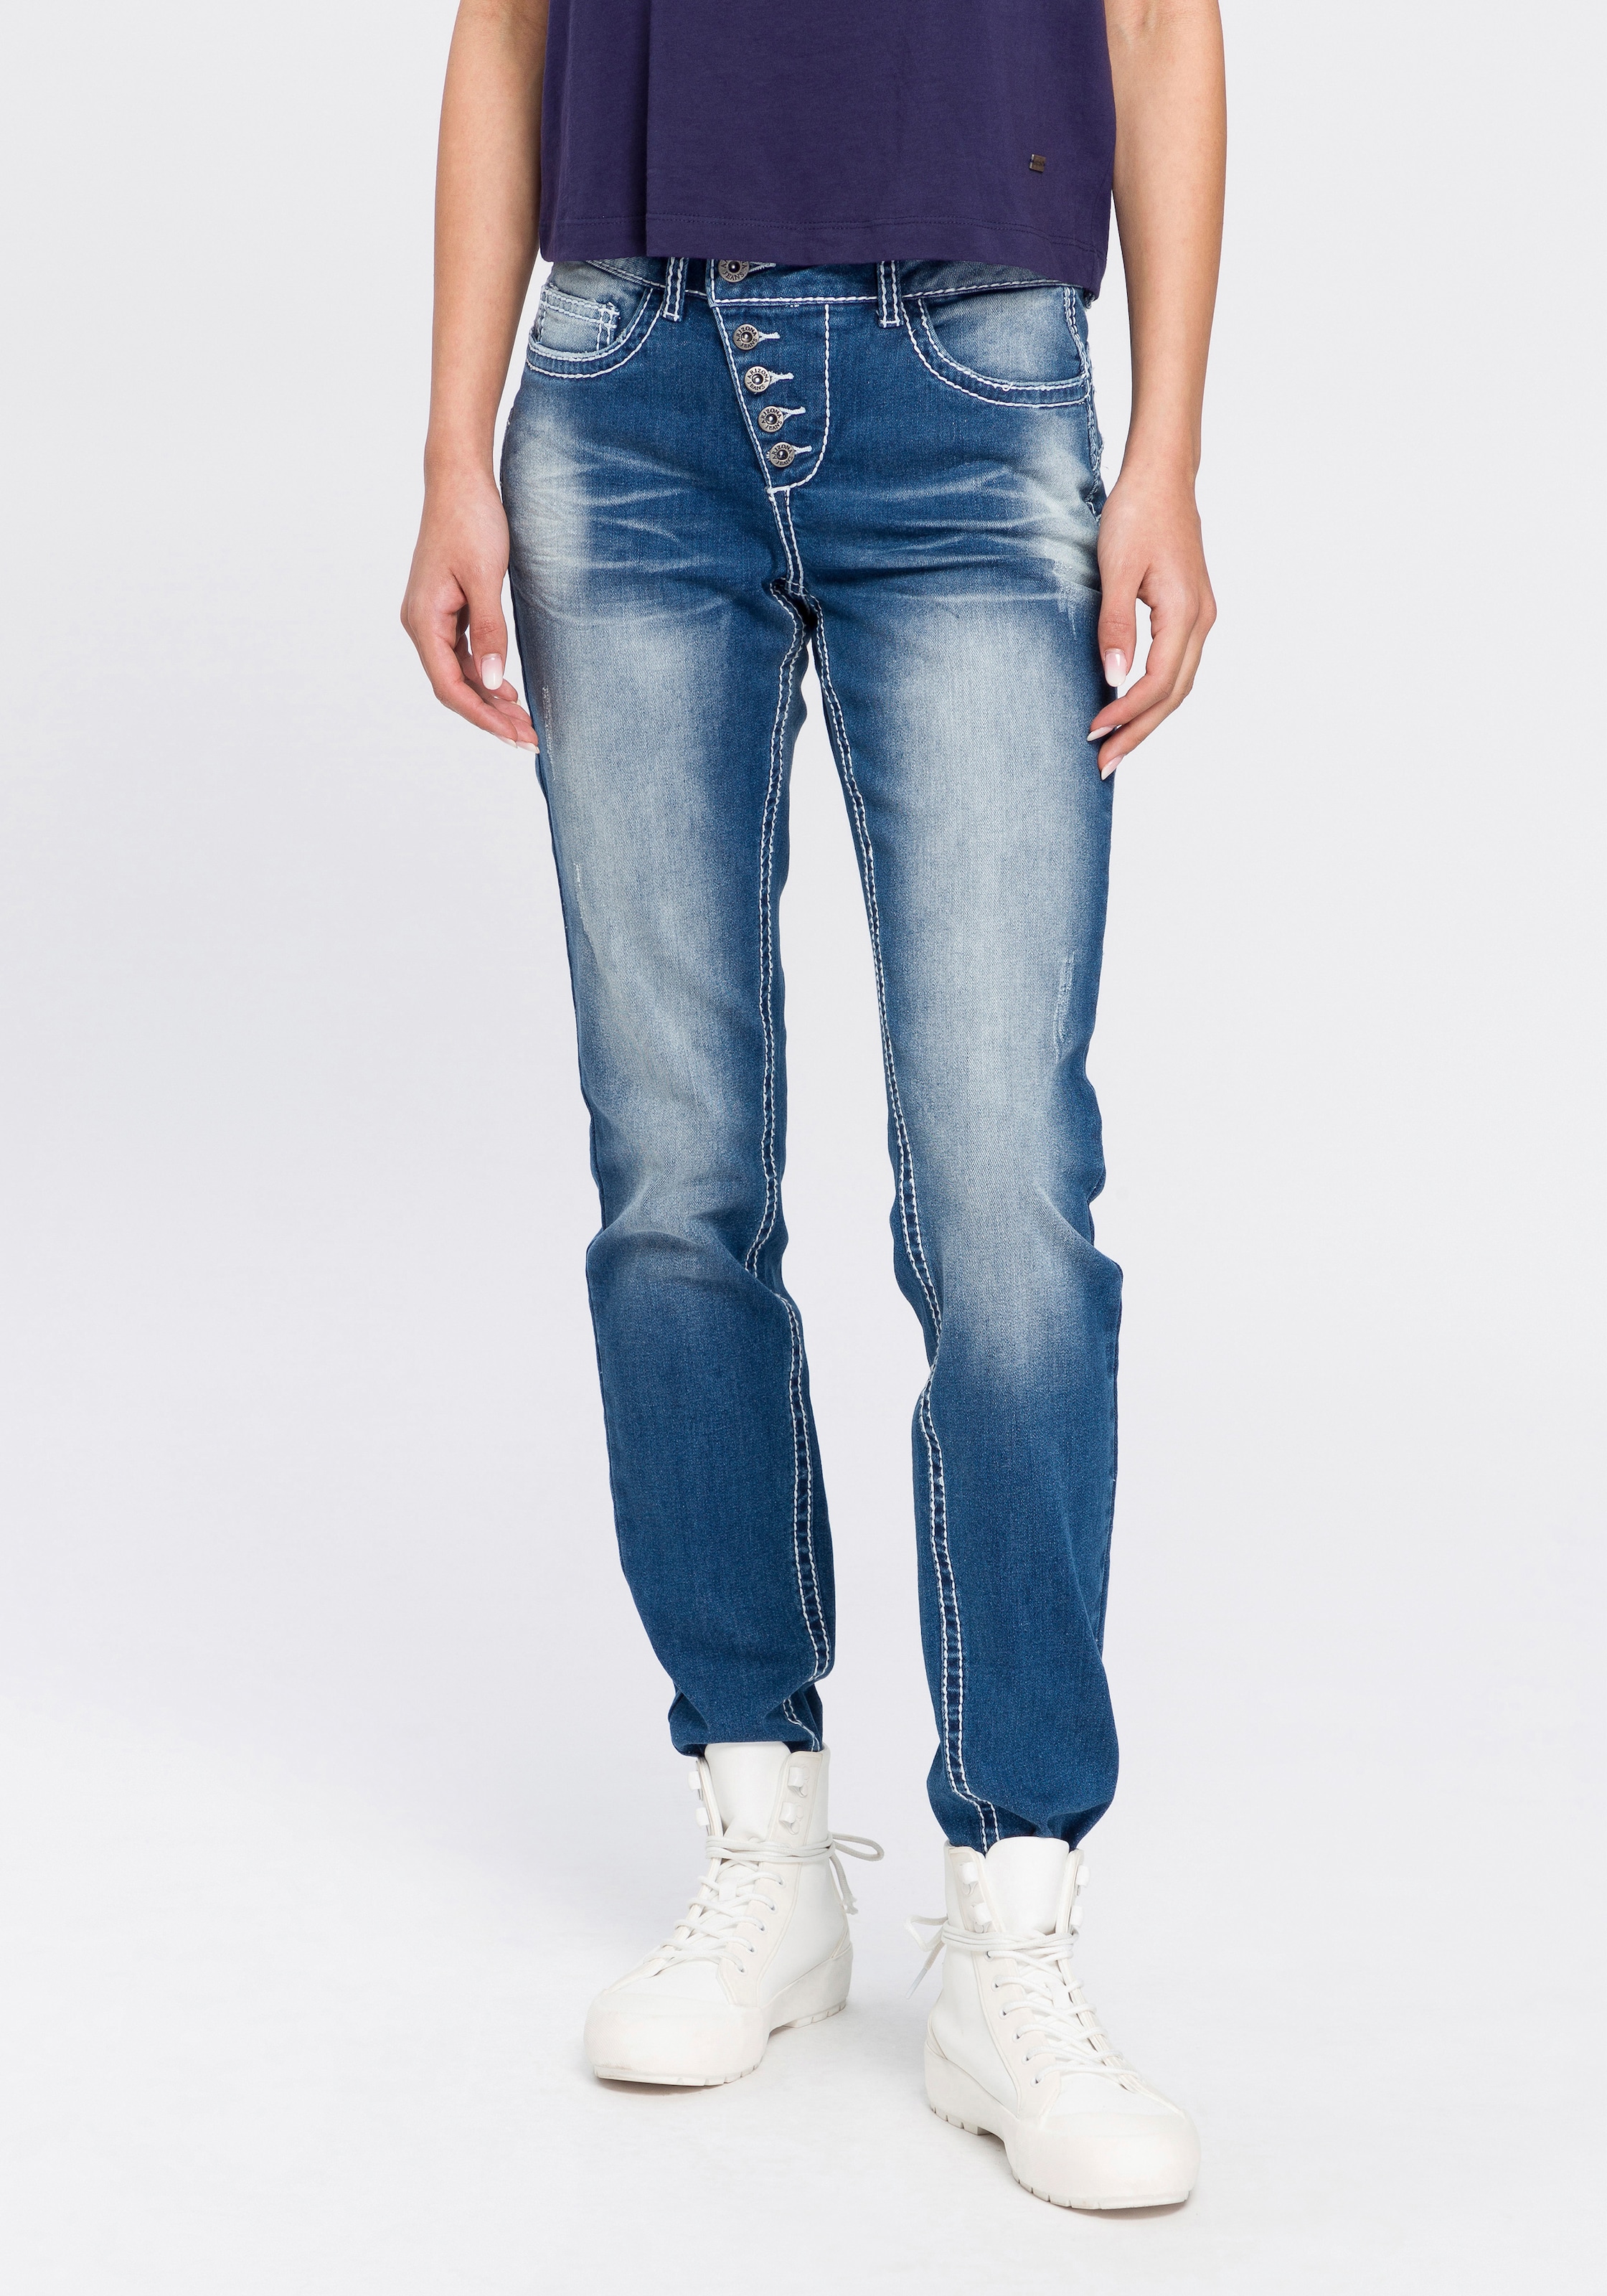 bei - Mid OTTOversand »Heavy Washed Shaping«, Slim-fit-Jeans Arizona Waist